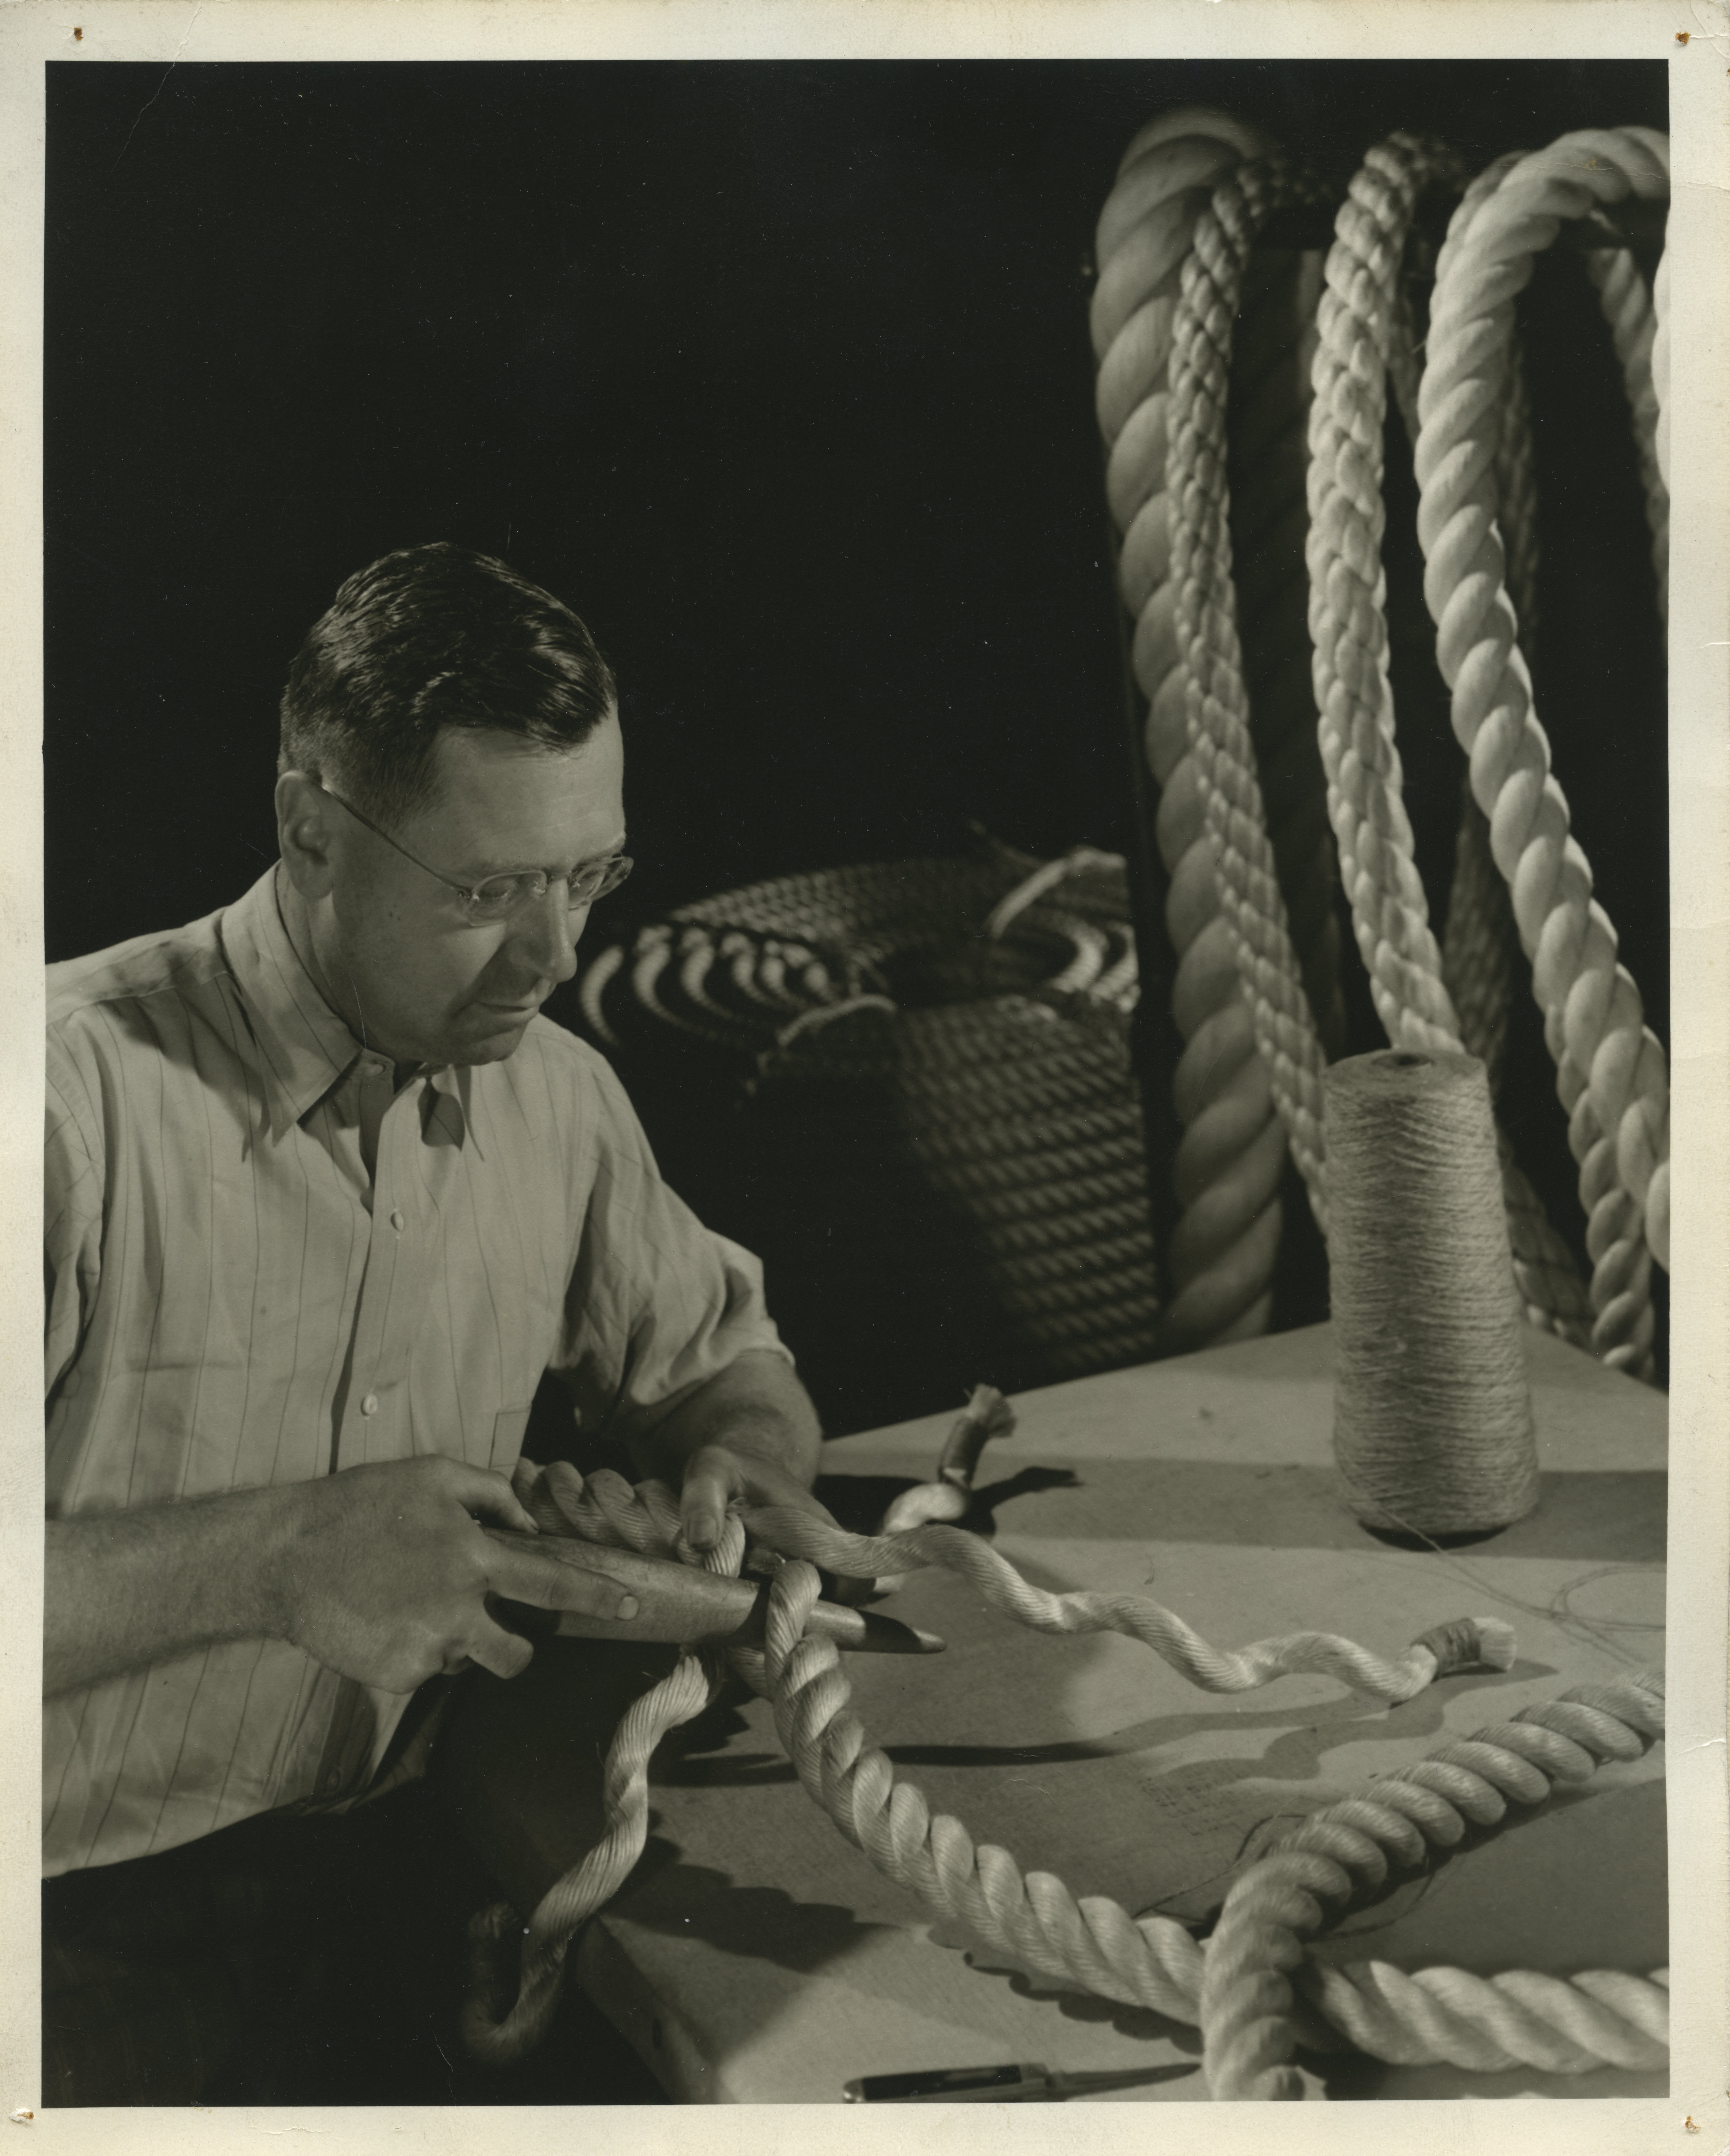 A black and white photo of a man concentrating on making rope with a tool.